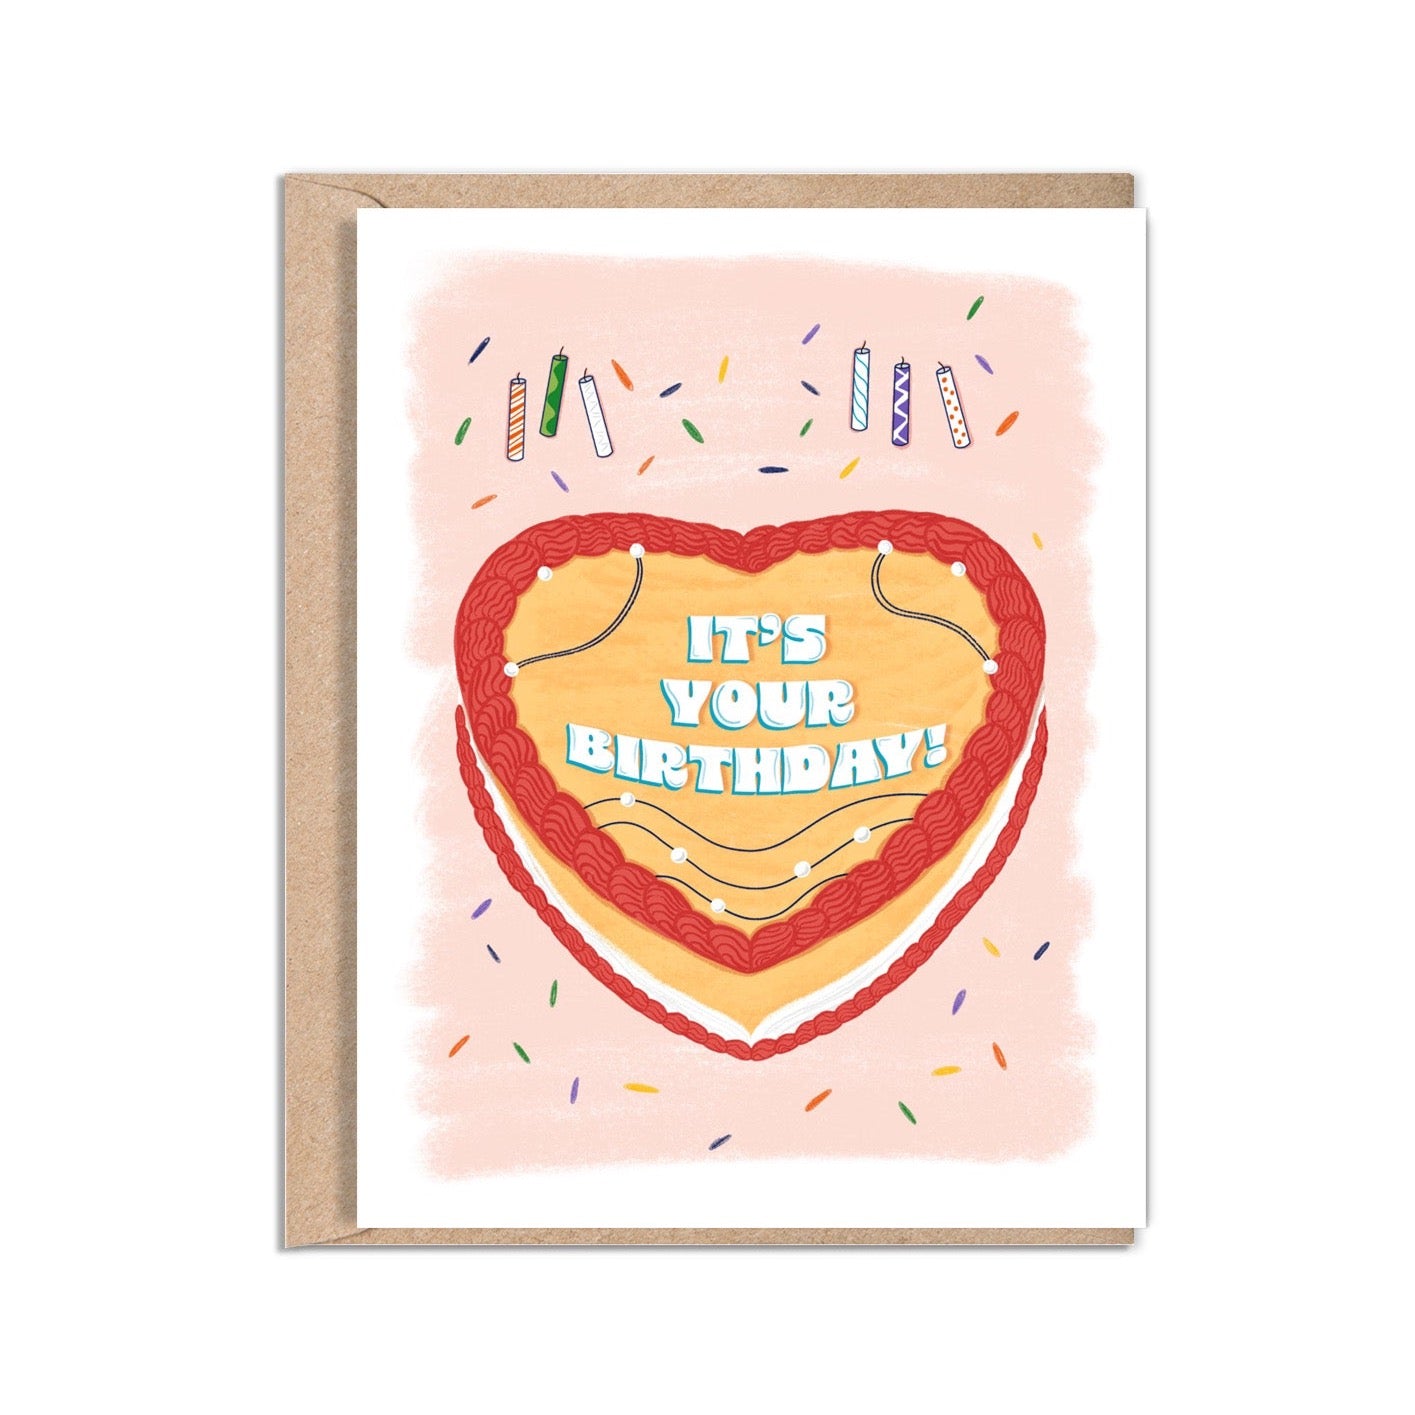 4.25 x 5.5” A2 size Birthday card illustration of a heart-shaped yellow cake with red icing. In the center of the cake are the words “It’s Your Birthday! ”with line detail and pearls along the cake. Colorful sprinkles and candles surround the cake. The textured background has soft red brush strokes over a white background. The inside of the card message reads “Happy Birthday, Hope your birthday is filled with all the things you love.”. Envelope included. Black Woman Owned.